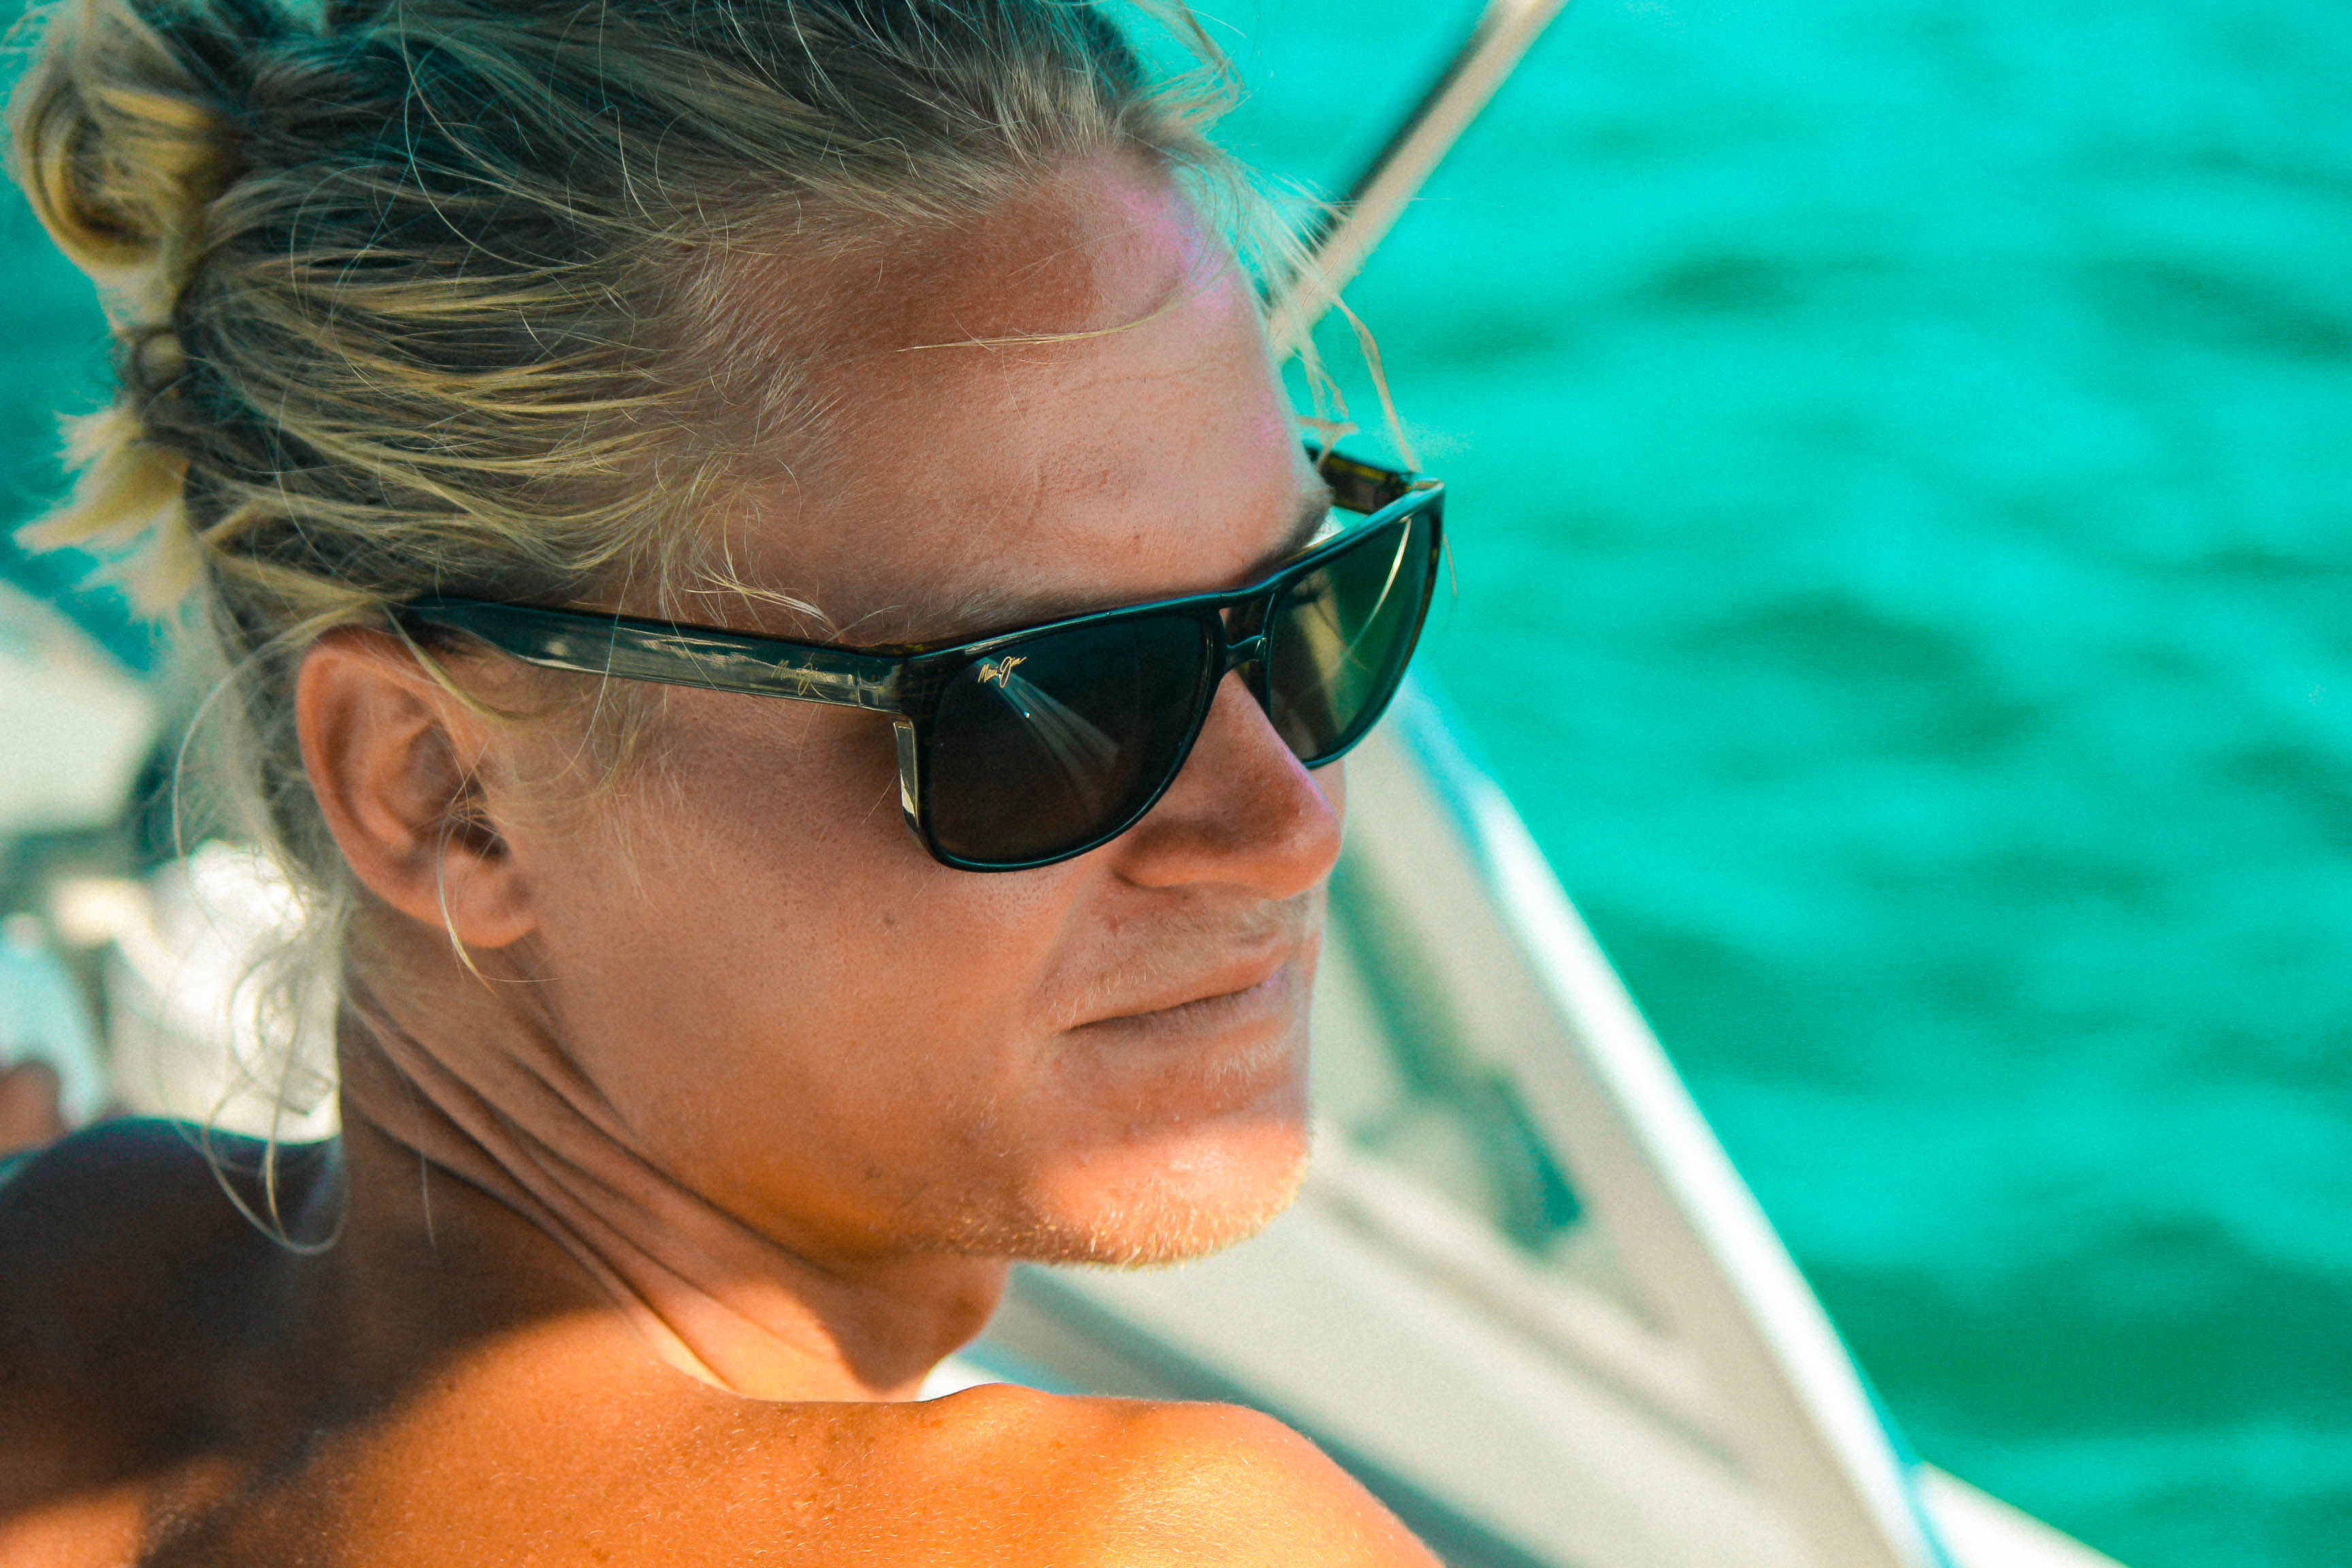 A woman in sunglasses on a boat